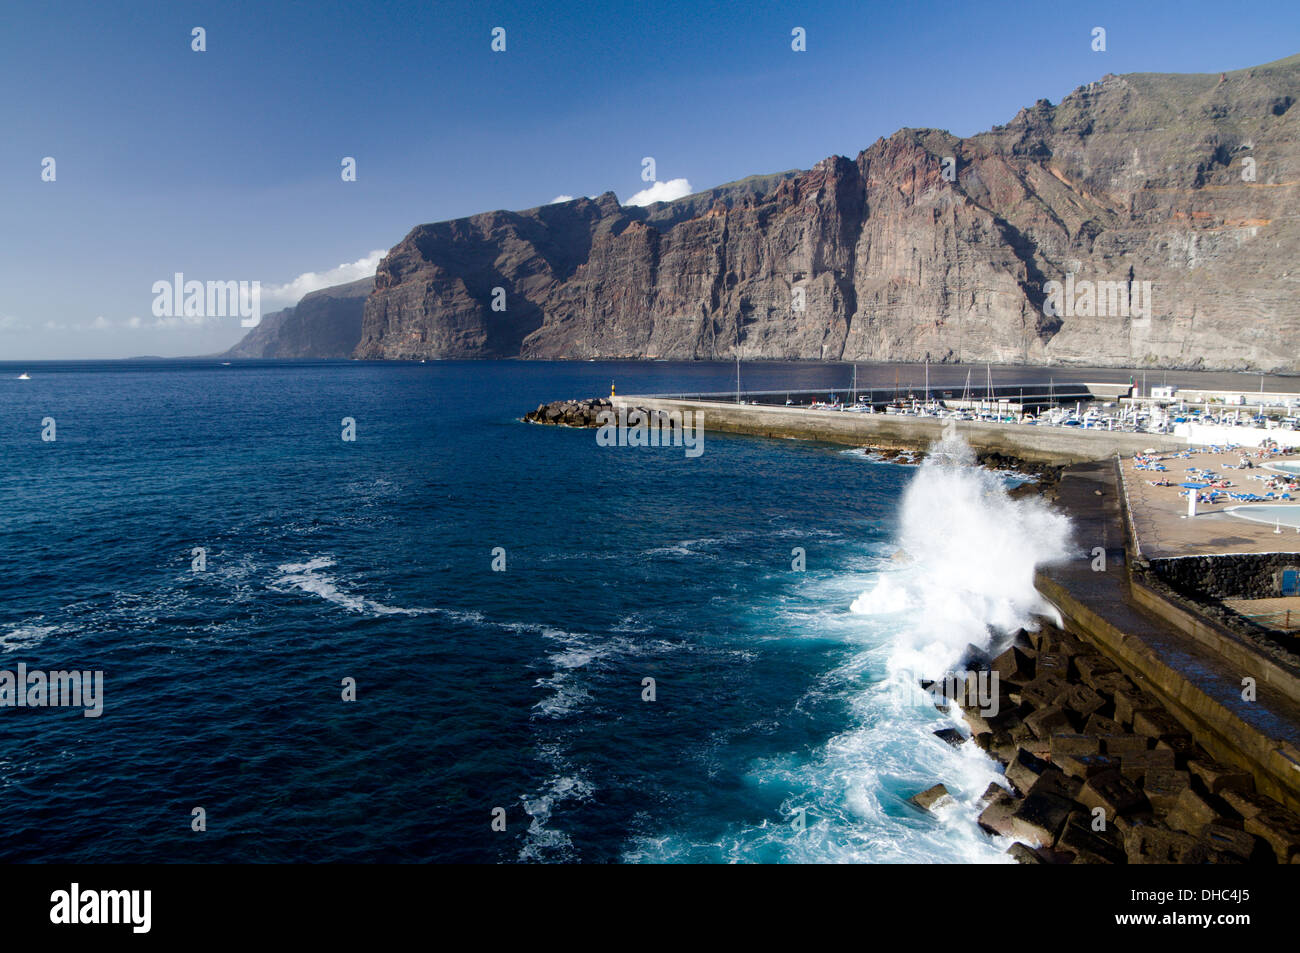 Los Gigantes and Los Gigantes  cliffs, Tenerife, Canary Islands, Spain. Stock Photo